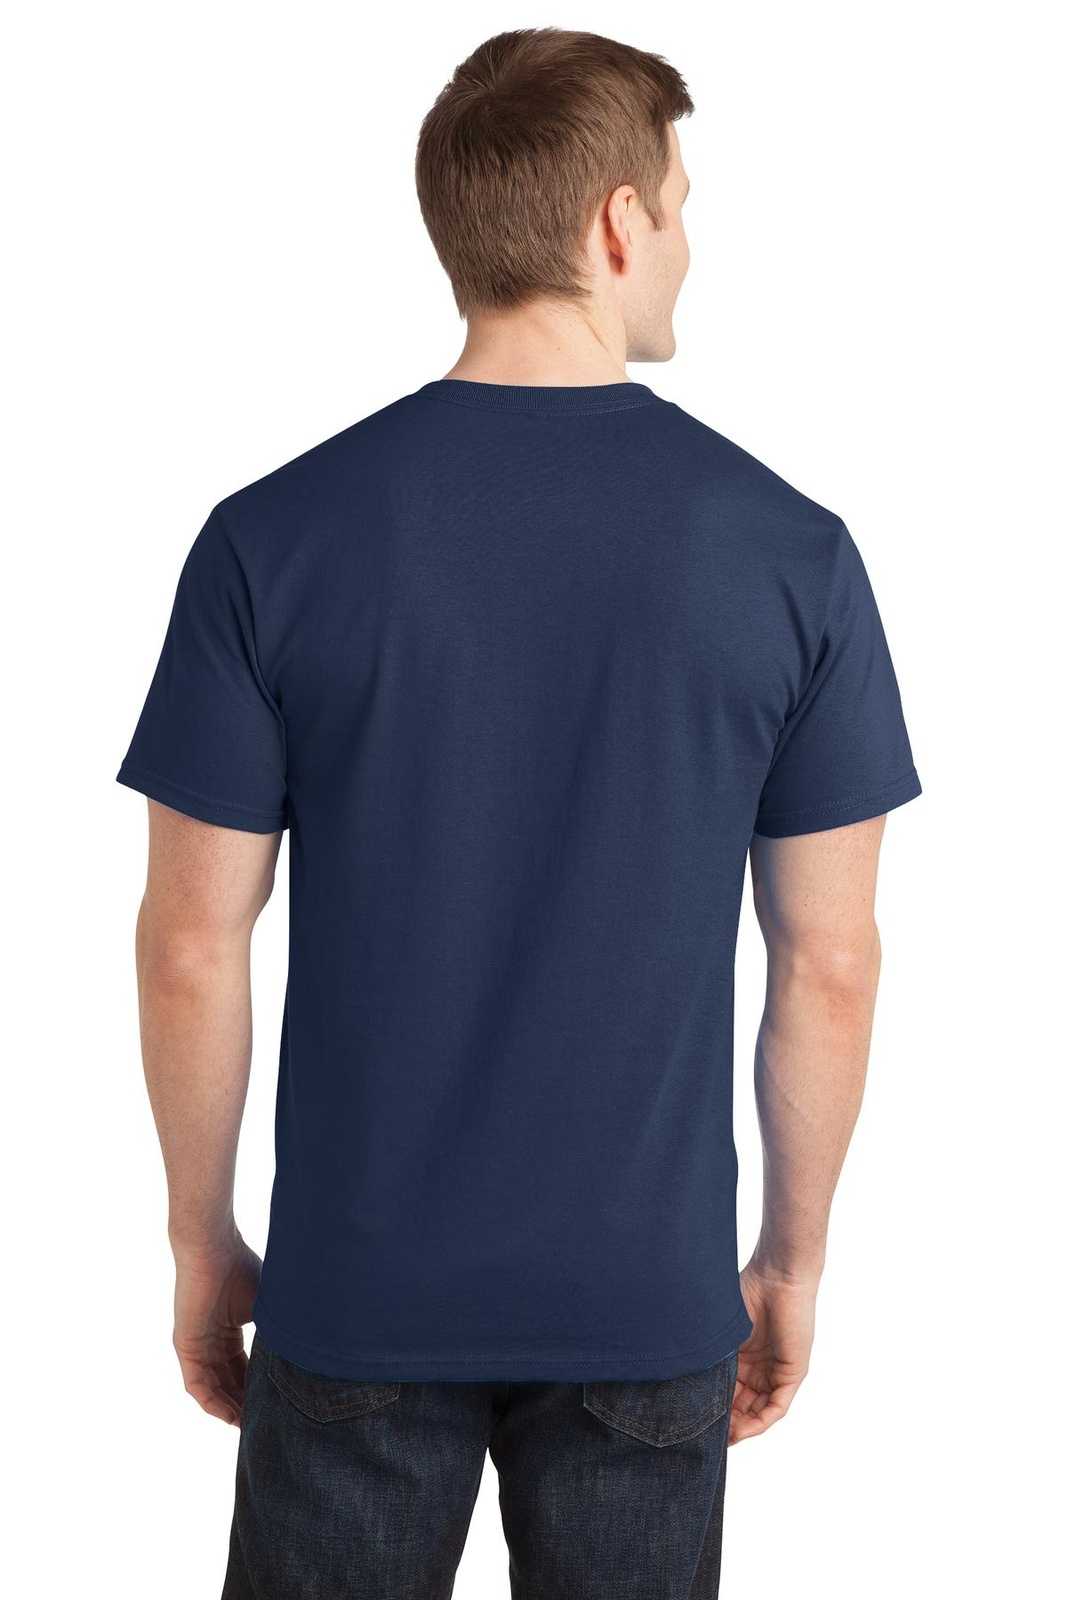 Port &amp; Company PC150 Ring Spun Cotton Tee - Navy - HIT a Double - 2